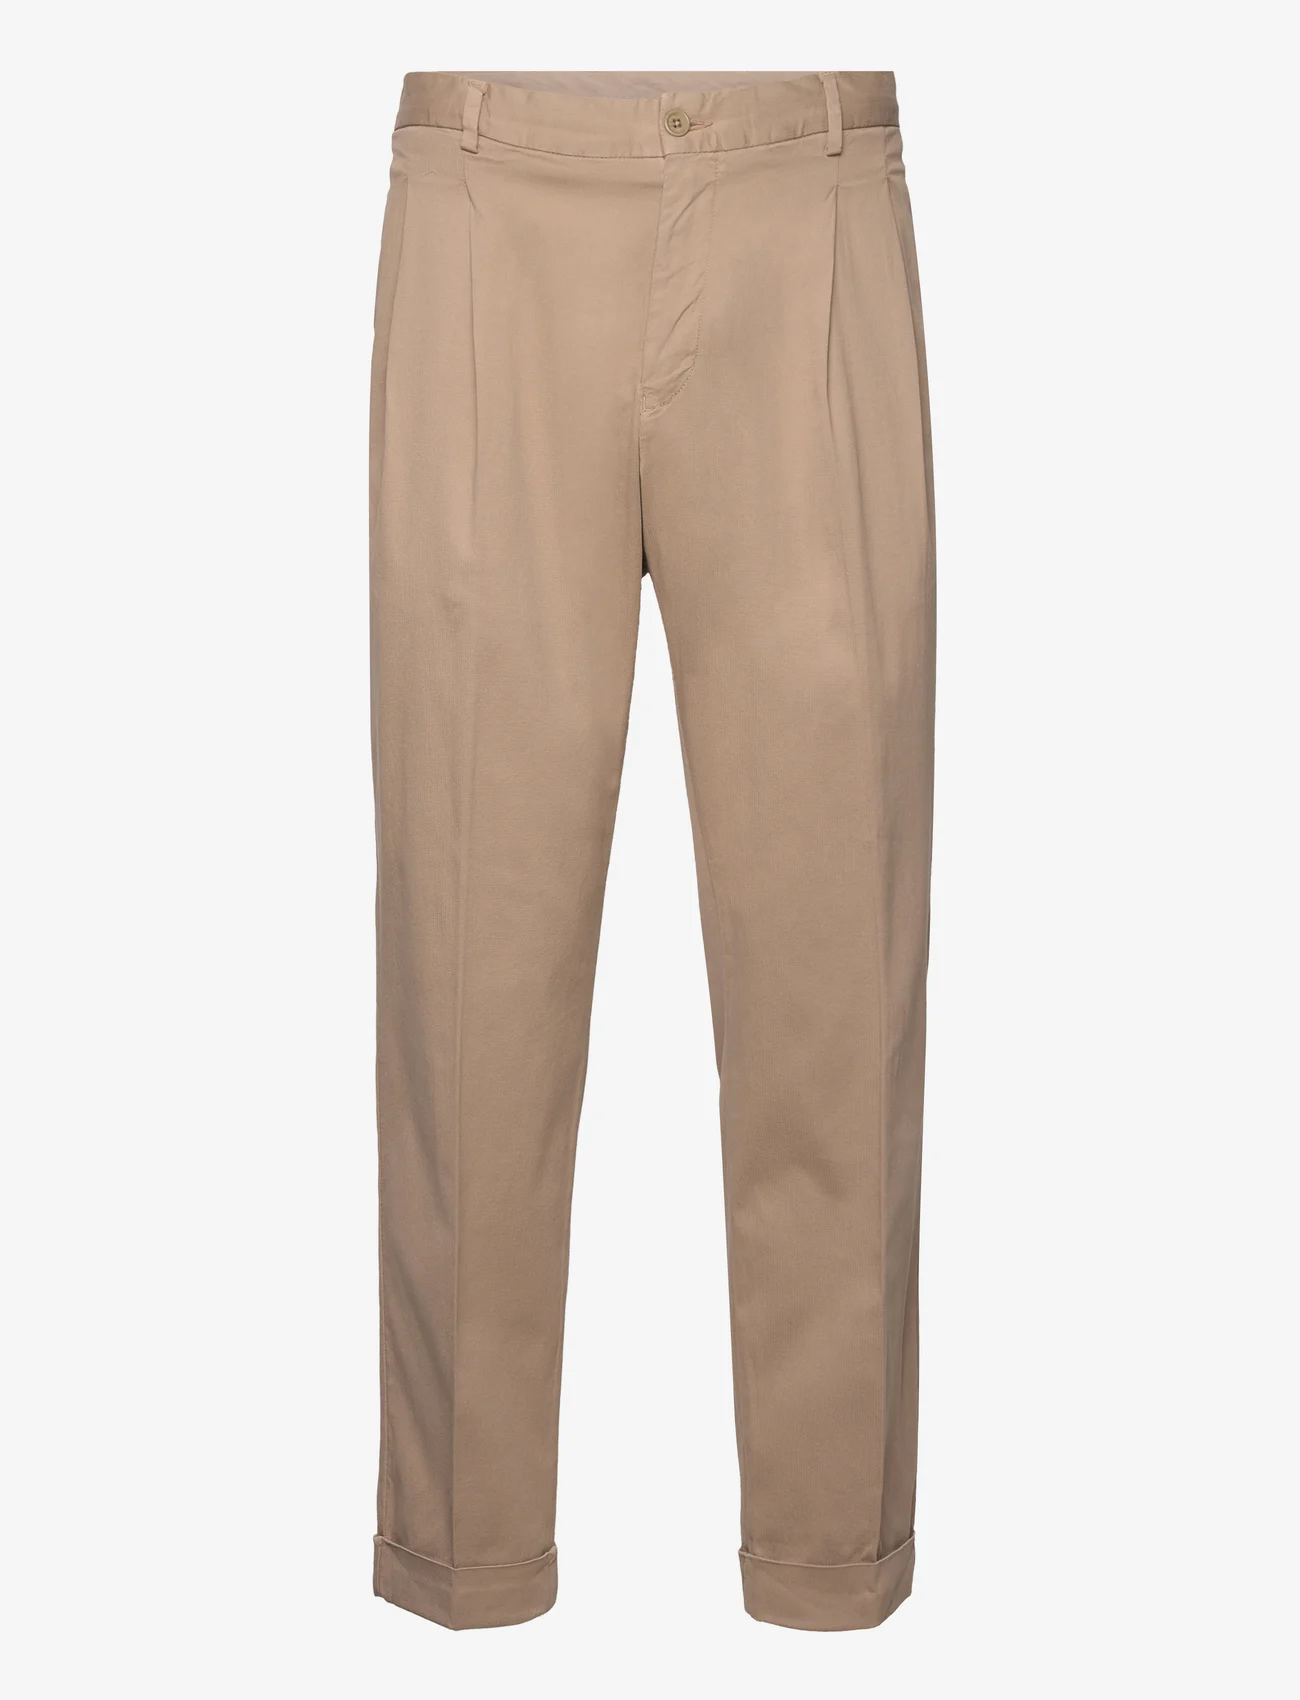 GANT - RELAXED TAPERED COTTON SUIT PANTS - chino püksid - taupe beige - 0